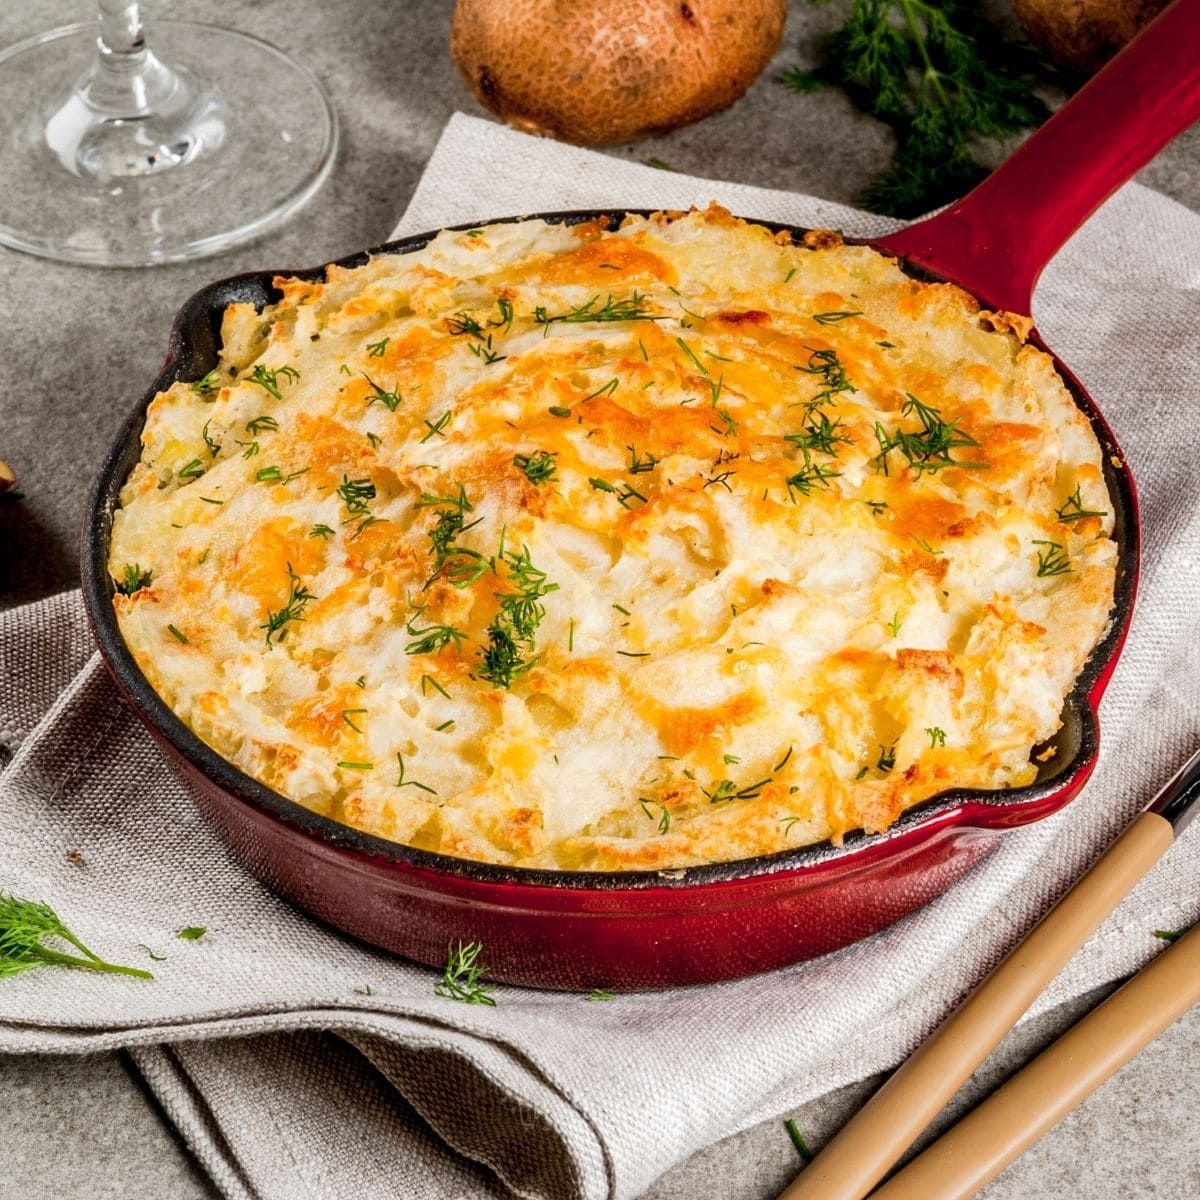 mashed potato casserole in a red cast iron pan.